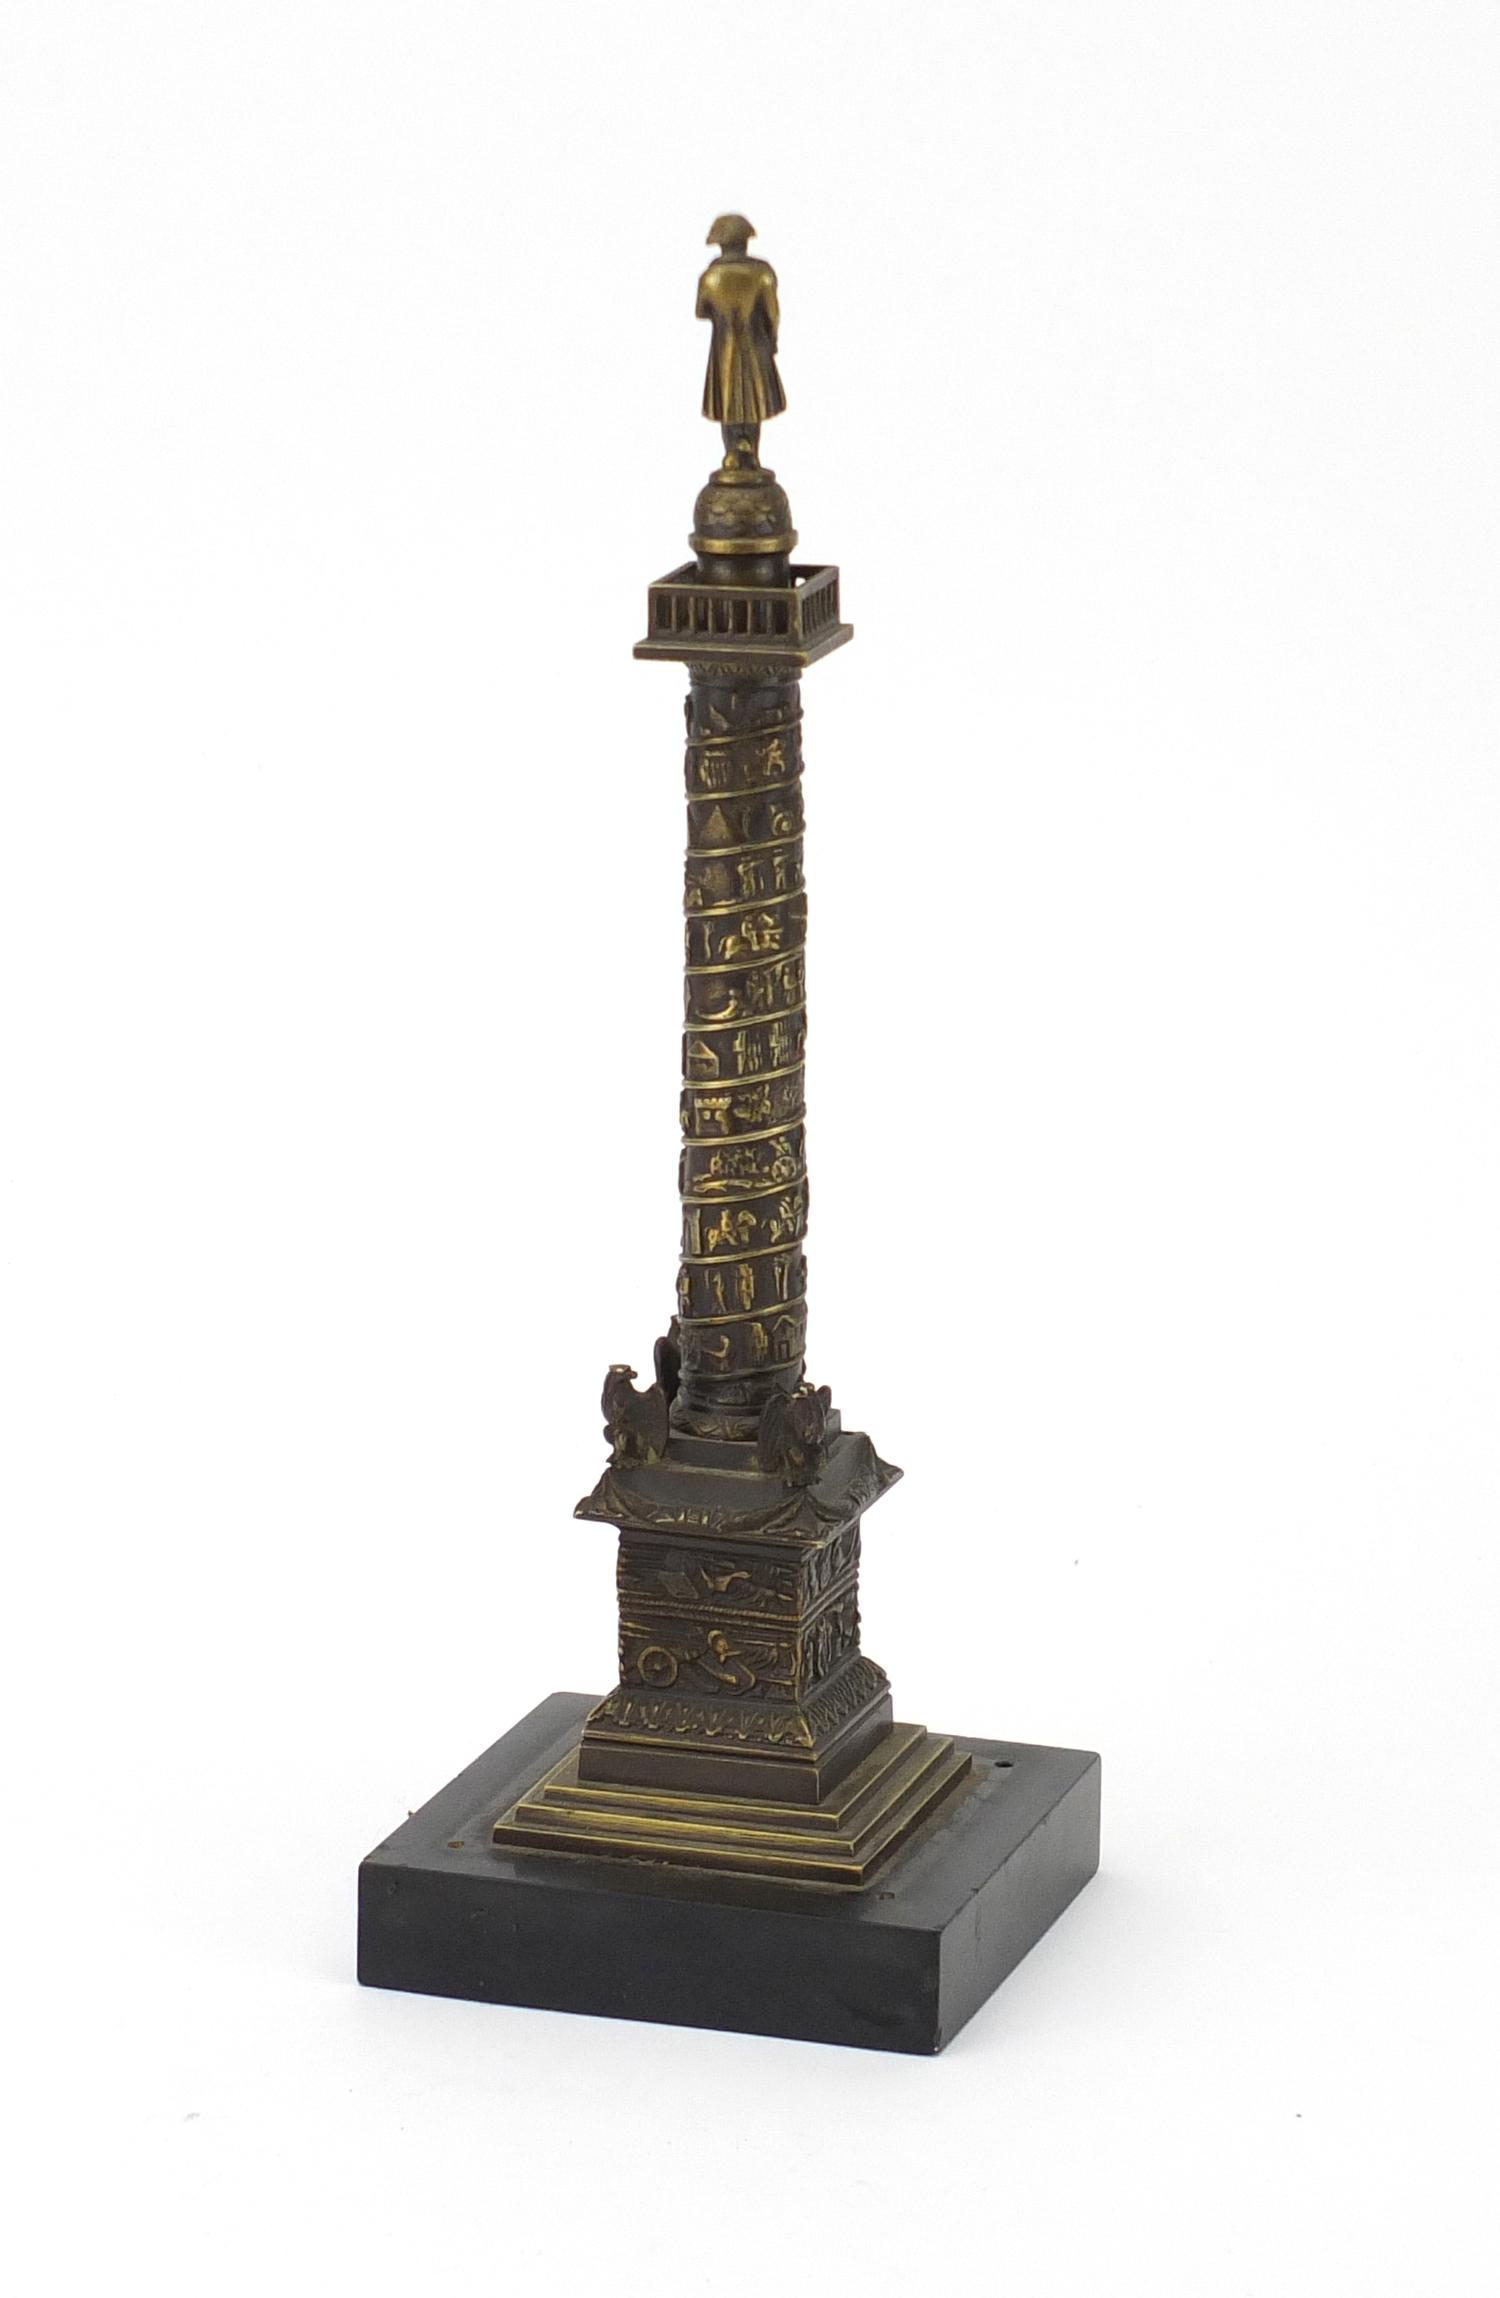 19th century Grand Tour patinated bronze model of Vendome column, raised on a square black slate - Image 5 of 6